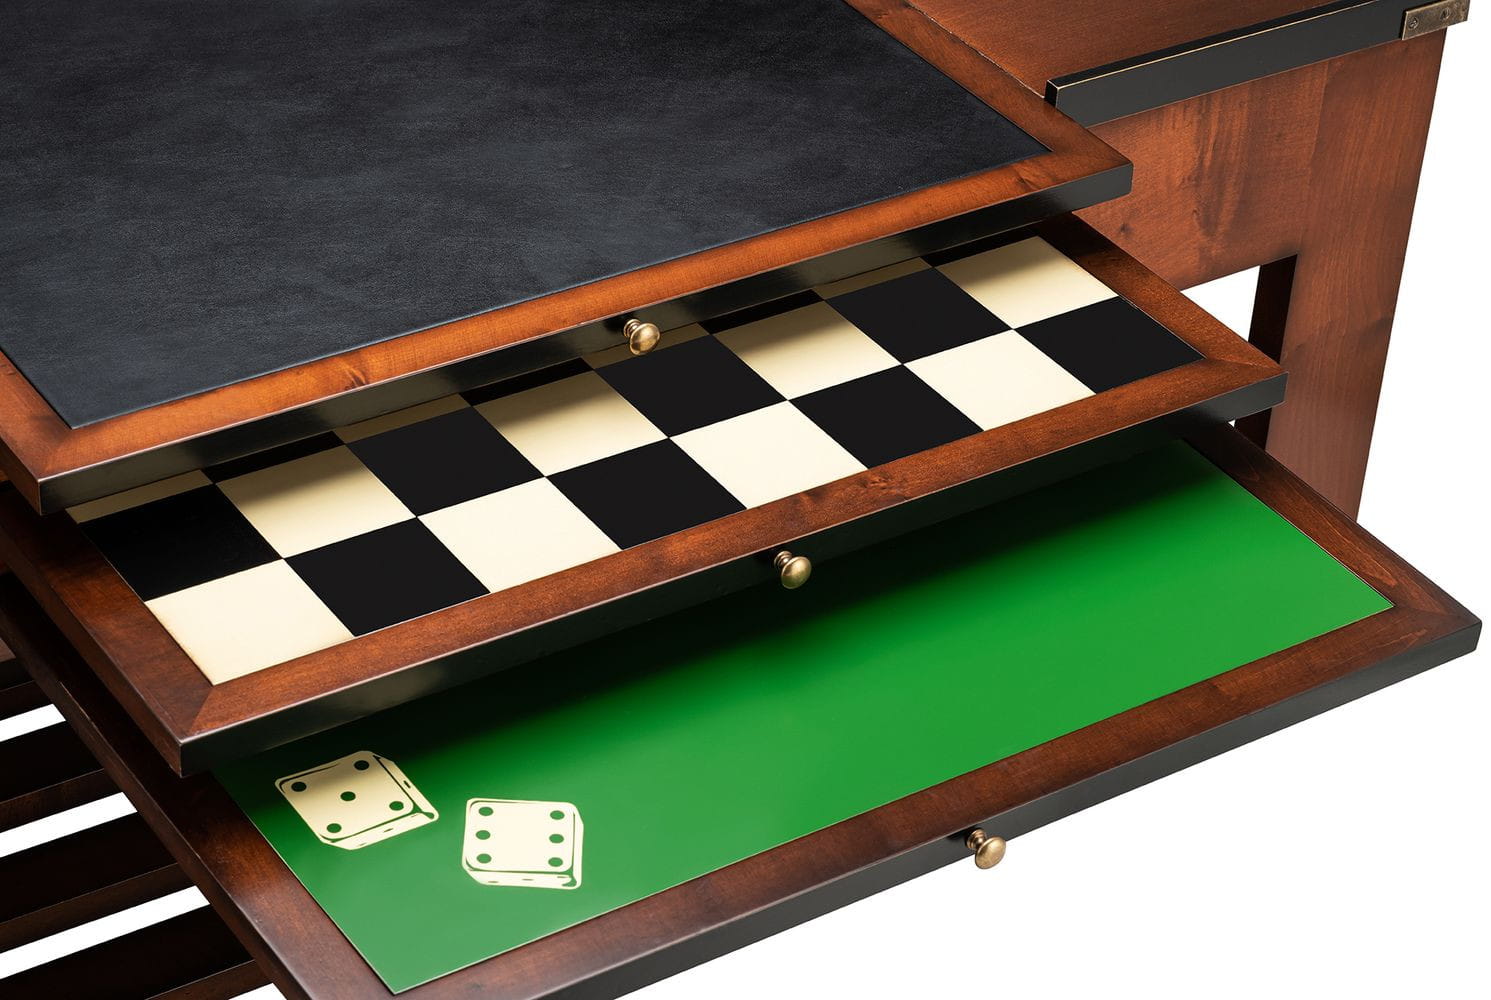 Authentic Models Game Table Lx Wx H 120x62x50